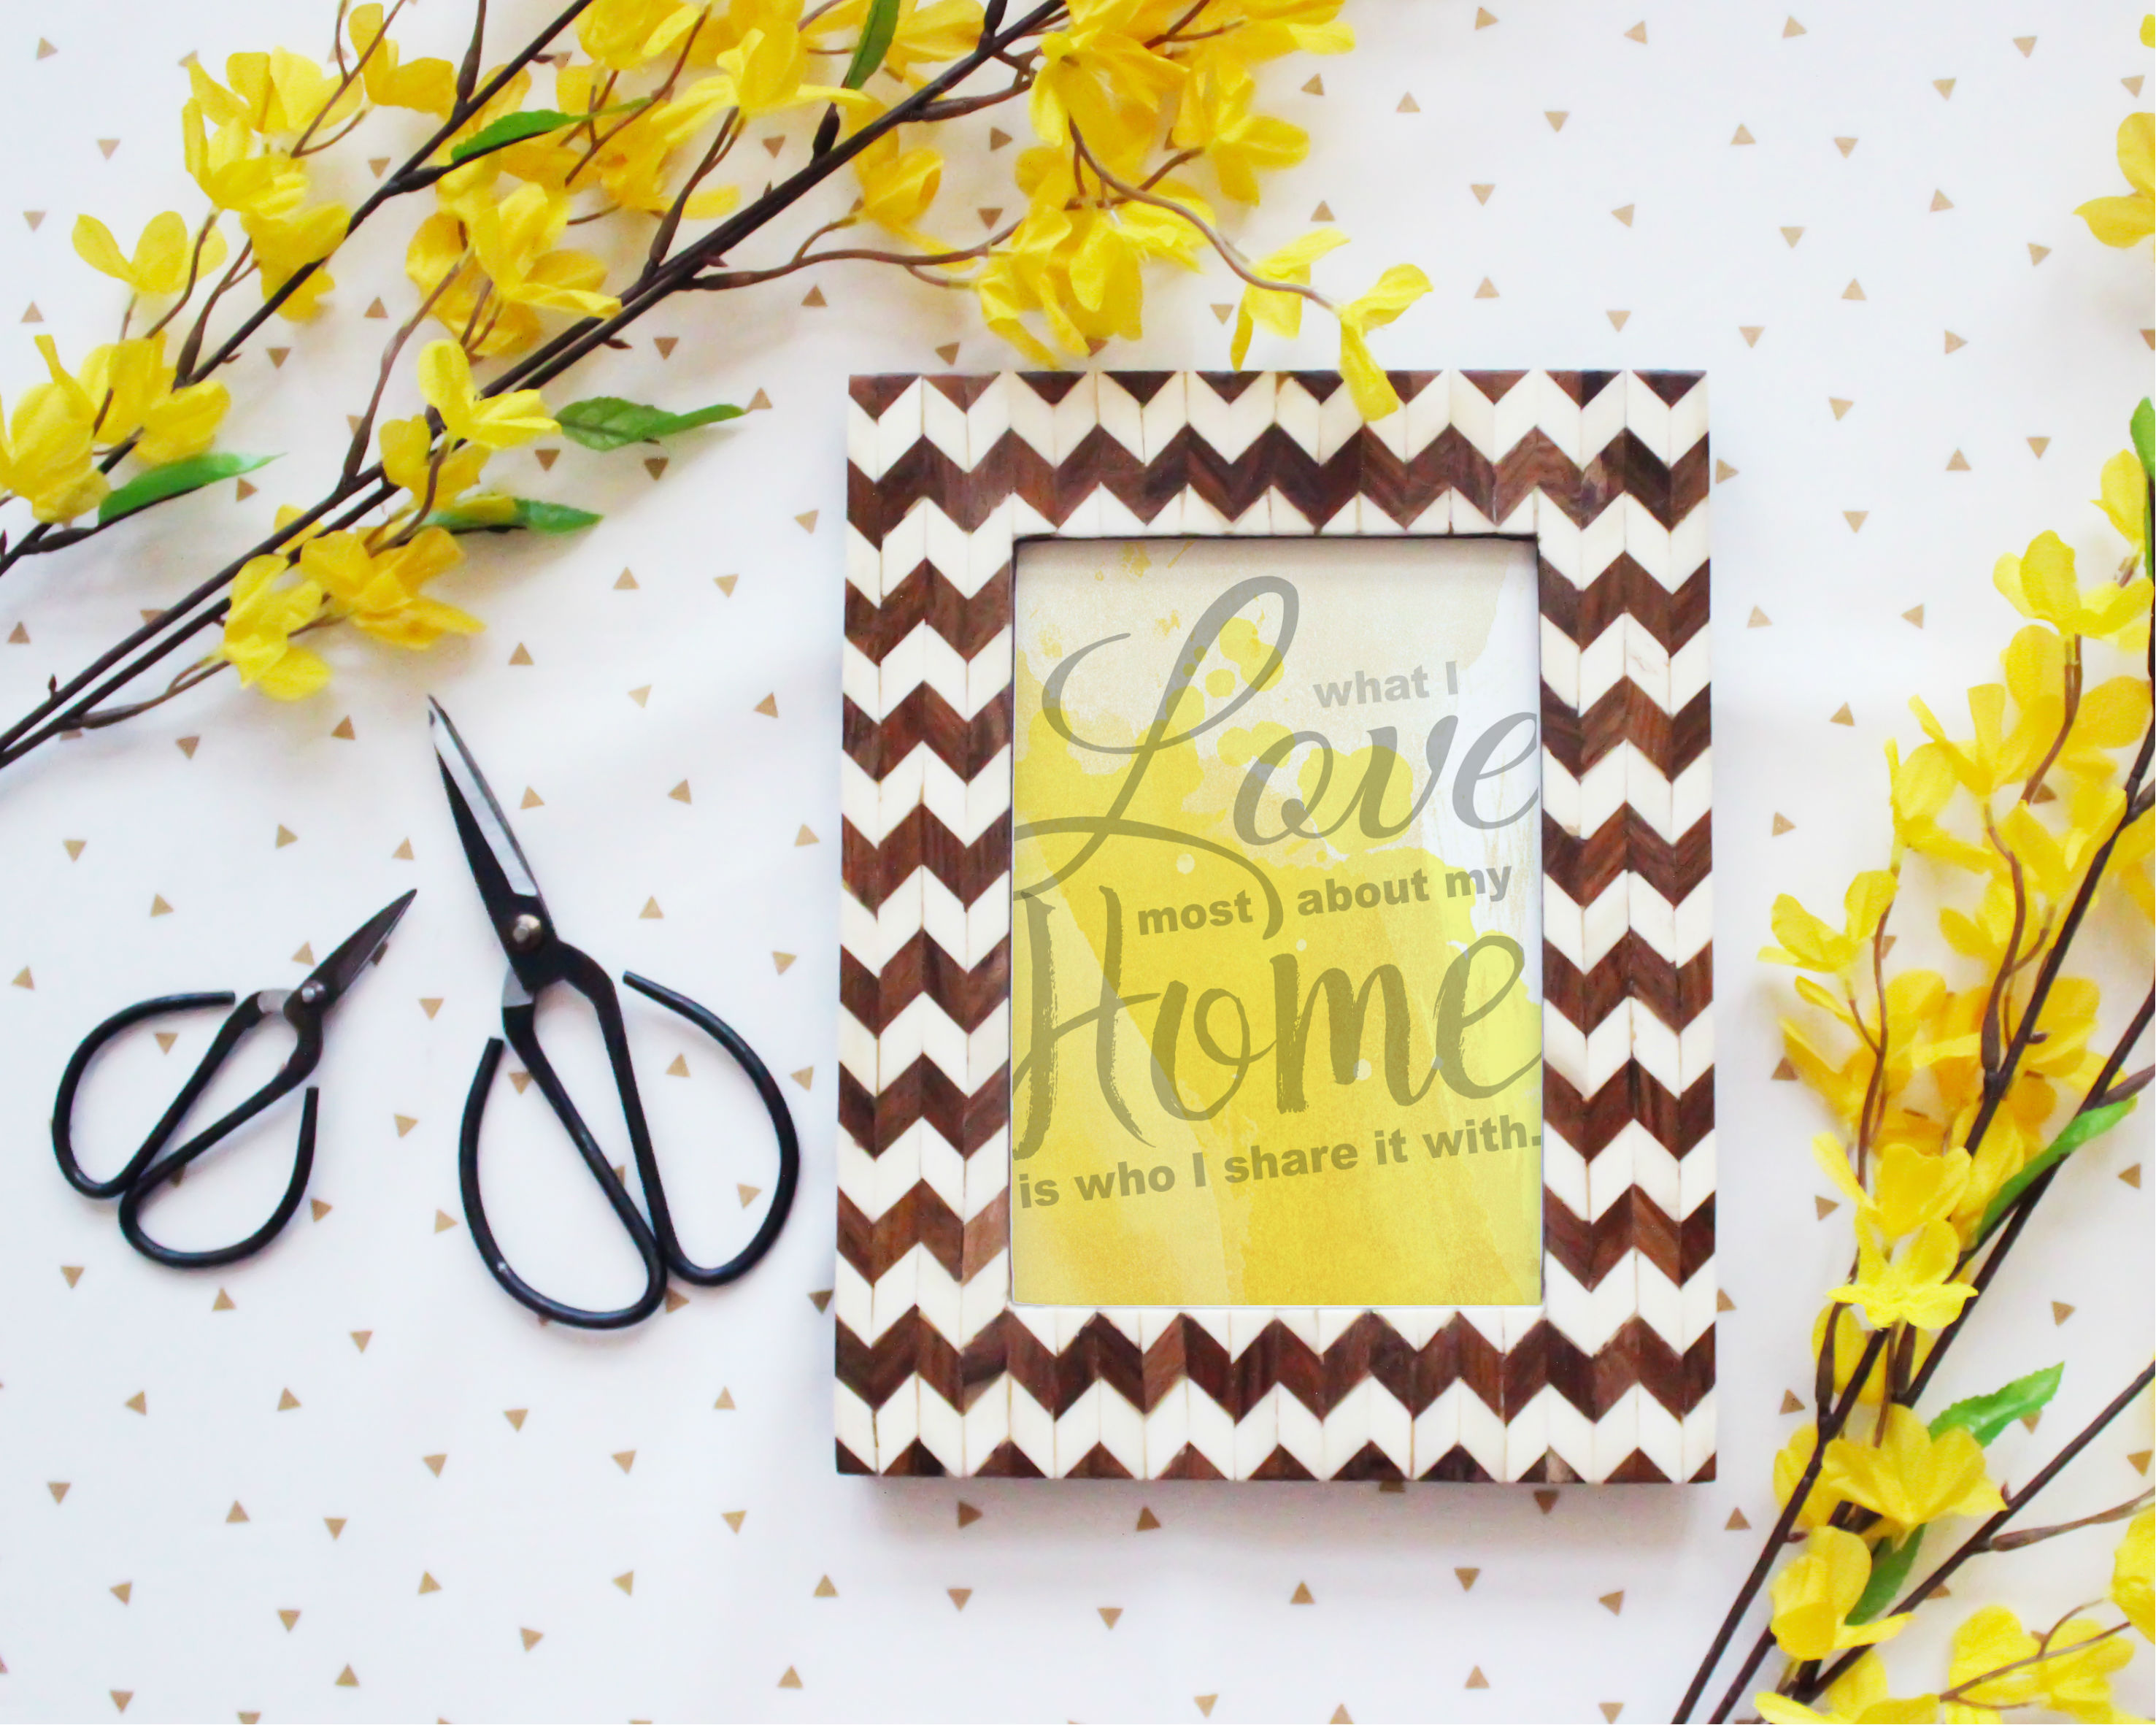 What I Love most about my Home is... (Free Printables... 4 Awesome Colors! )